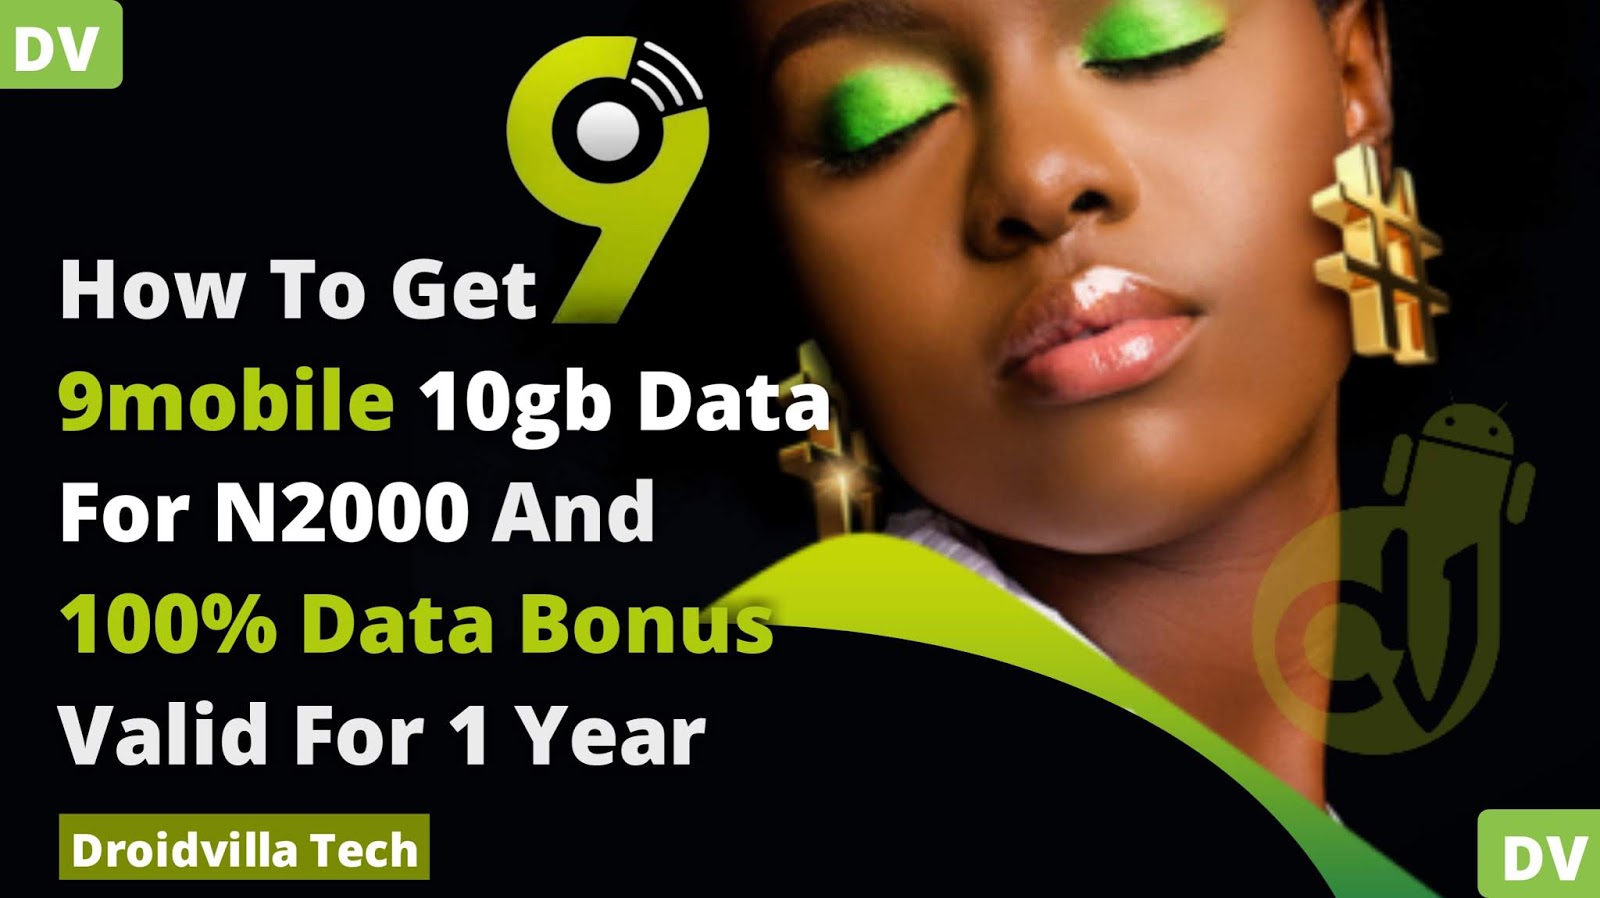 How To Get 9mobile 10gb Data For N2000 And 100% Data Bonus Valid For 1 Year